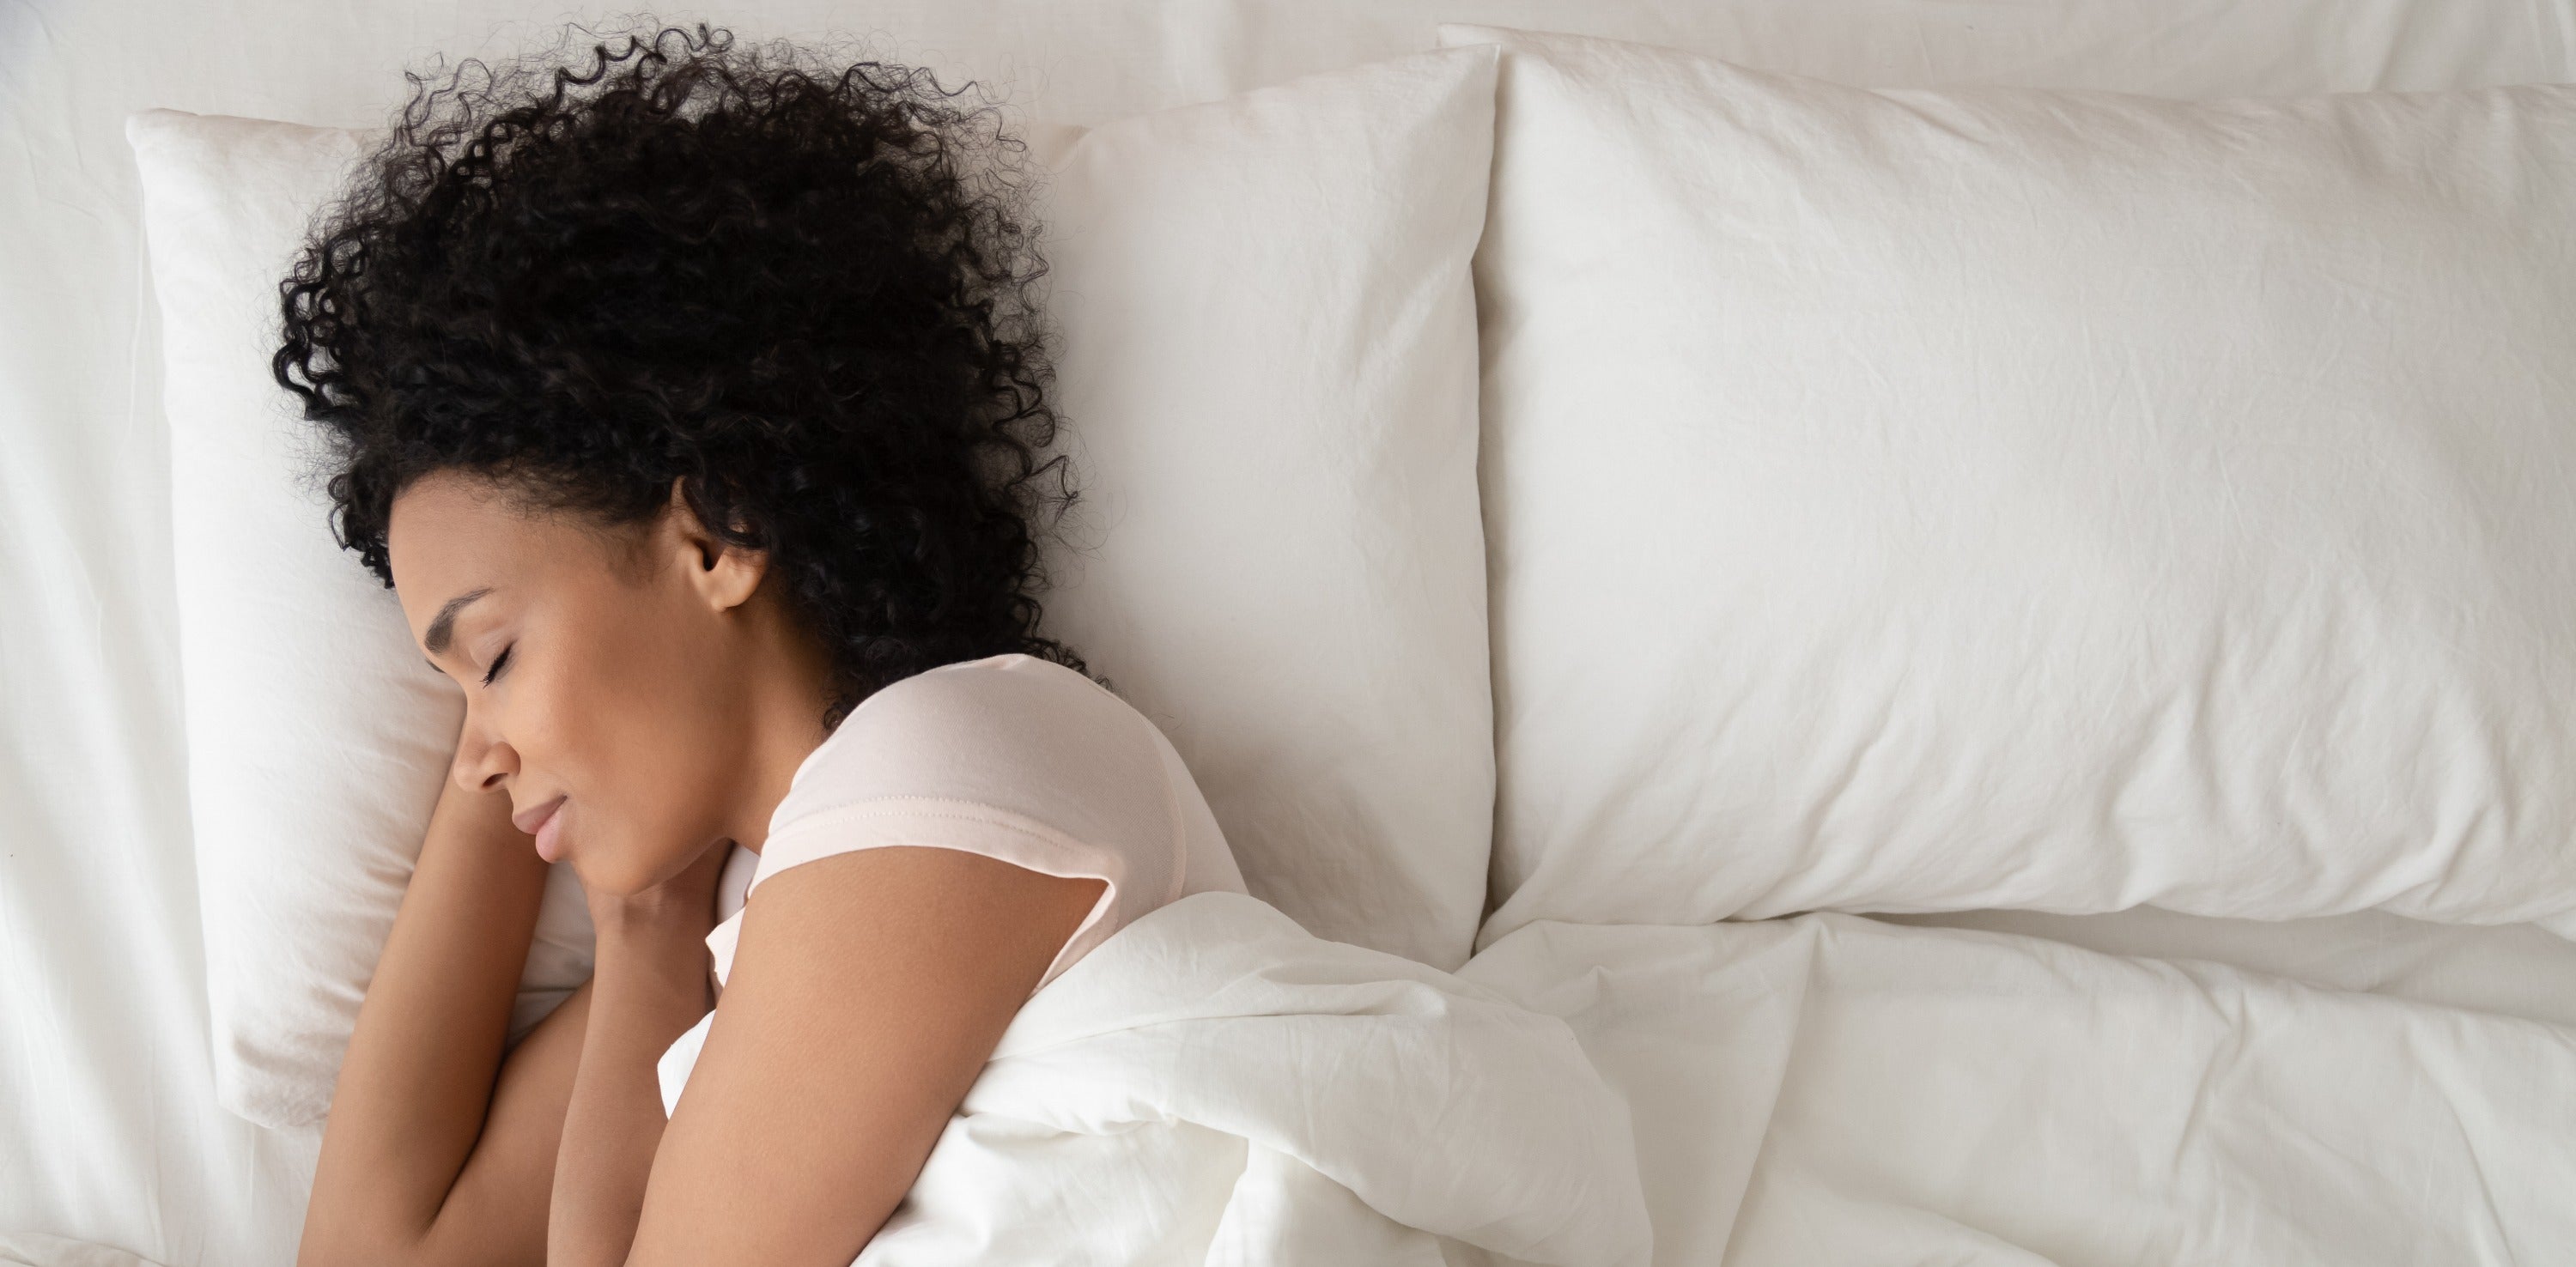 How To Master Good Sleep During Cancer Treatment: Insomnia and Cancer